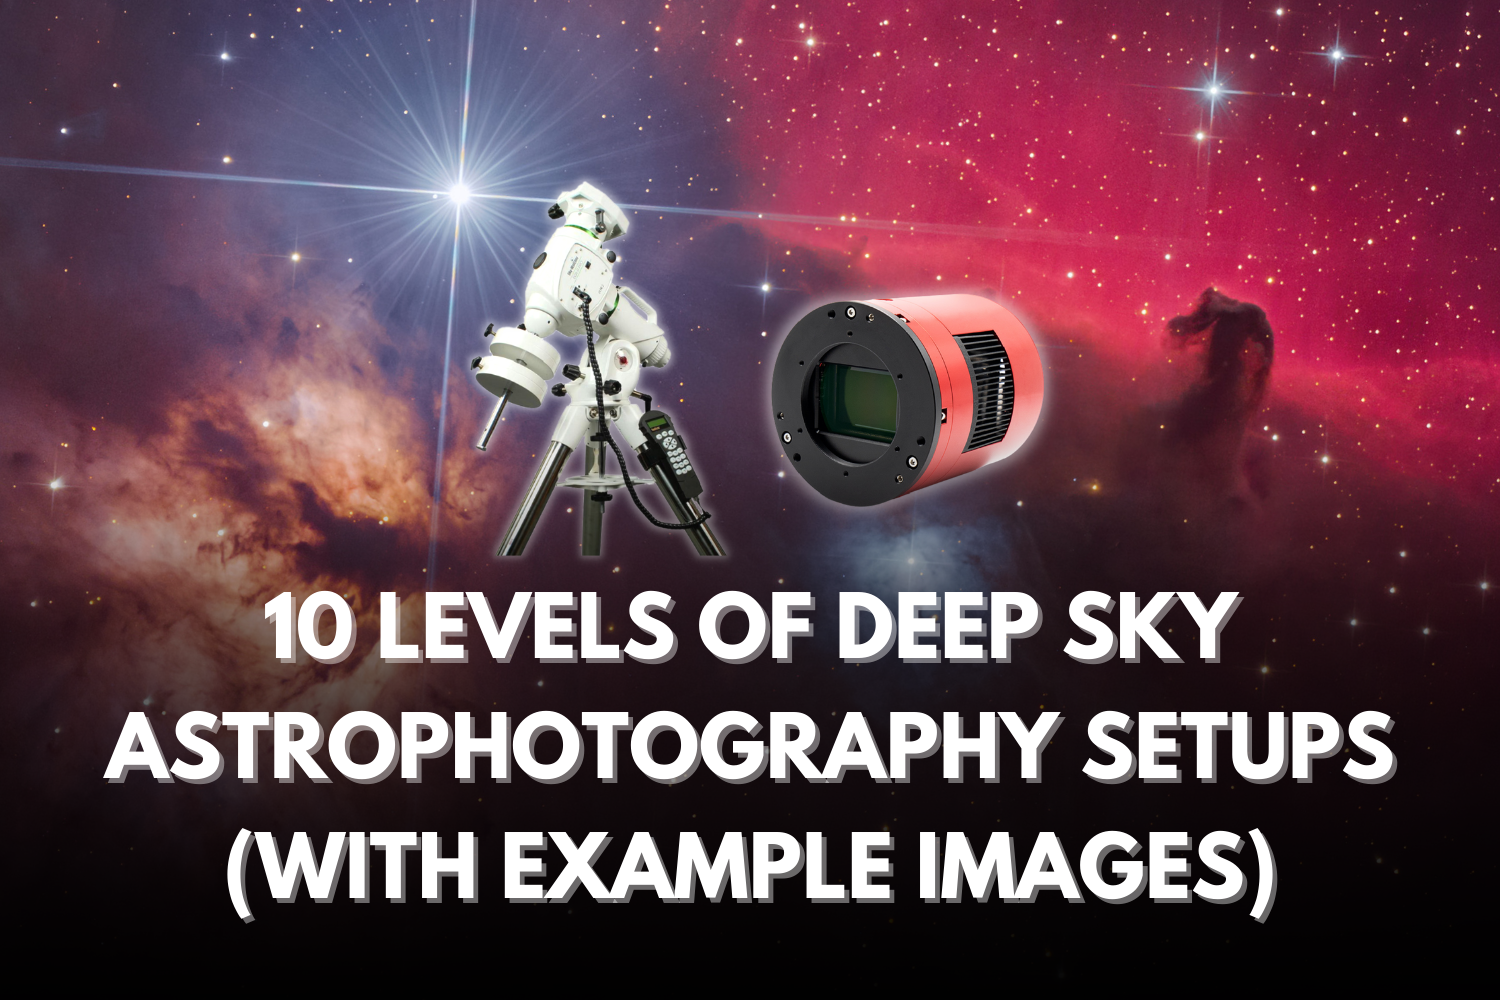 10 Levels of Deep Sky Astrophotography Setups (with Example Images)